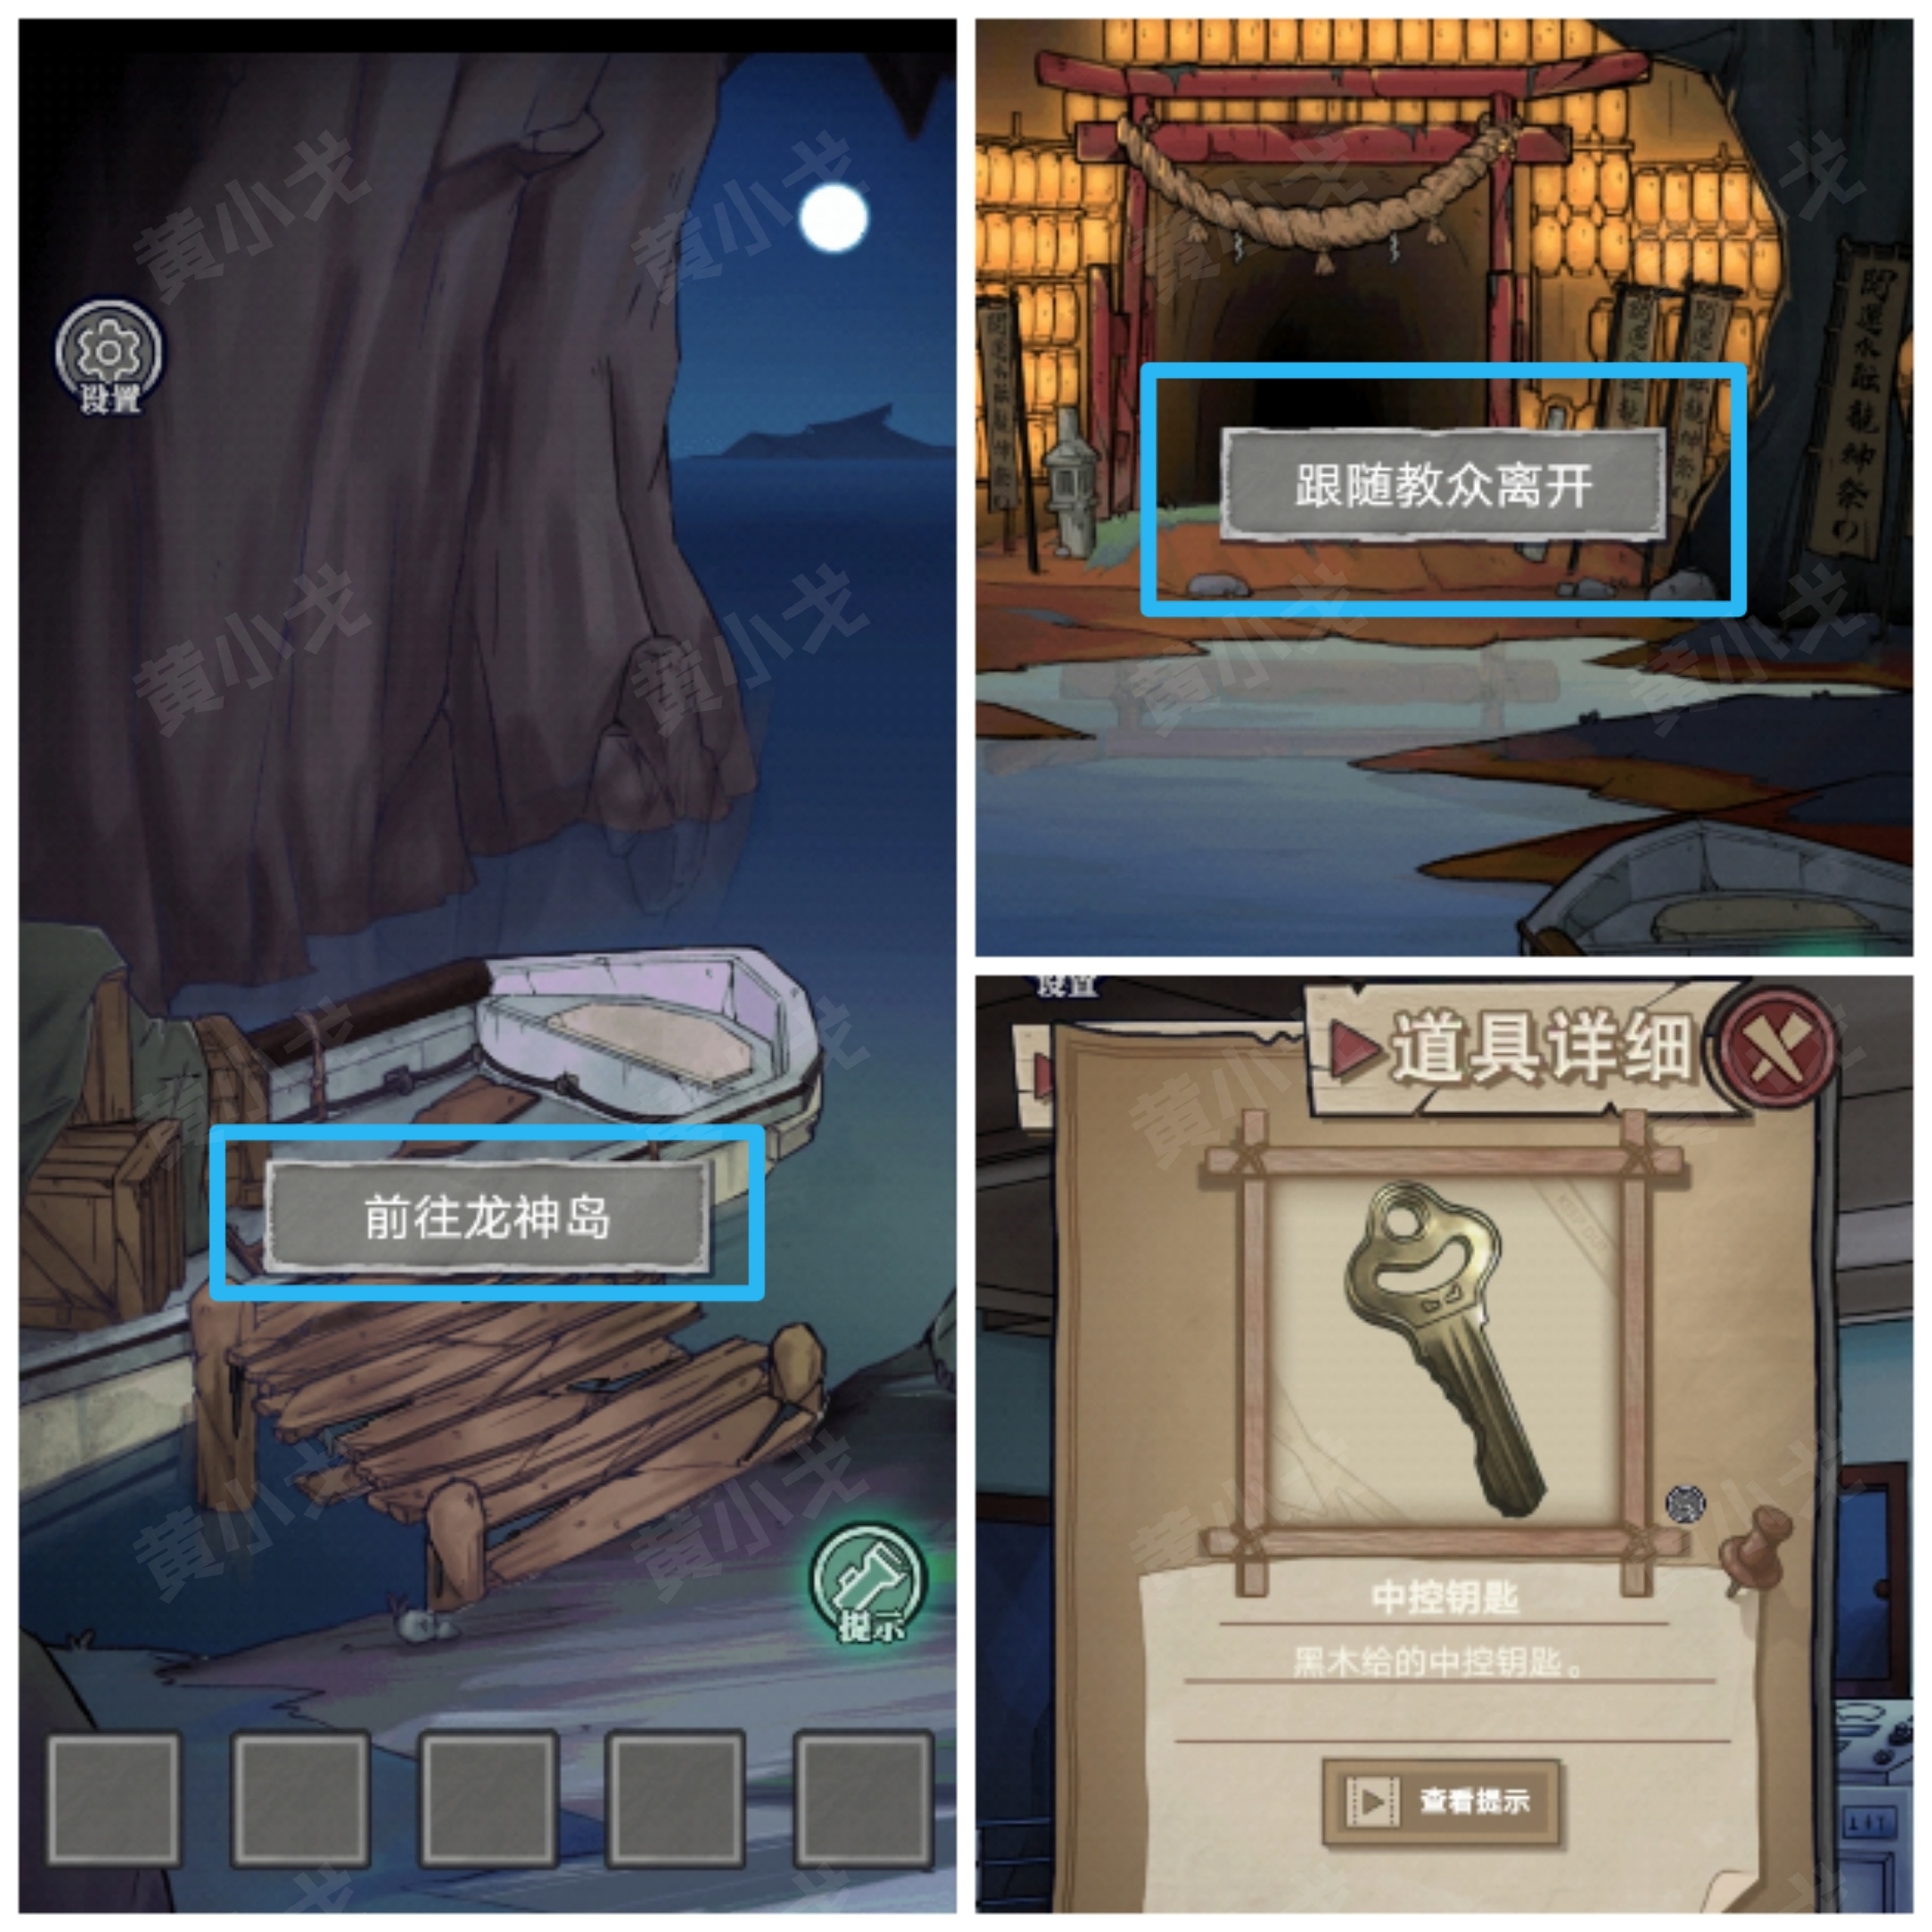 Extreme Escape: The Mysterious Case of Curse Village Chapter 4 Walkthrough with Graphics and Text